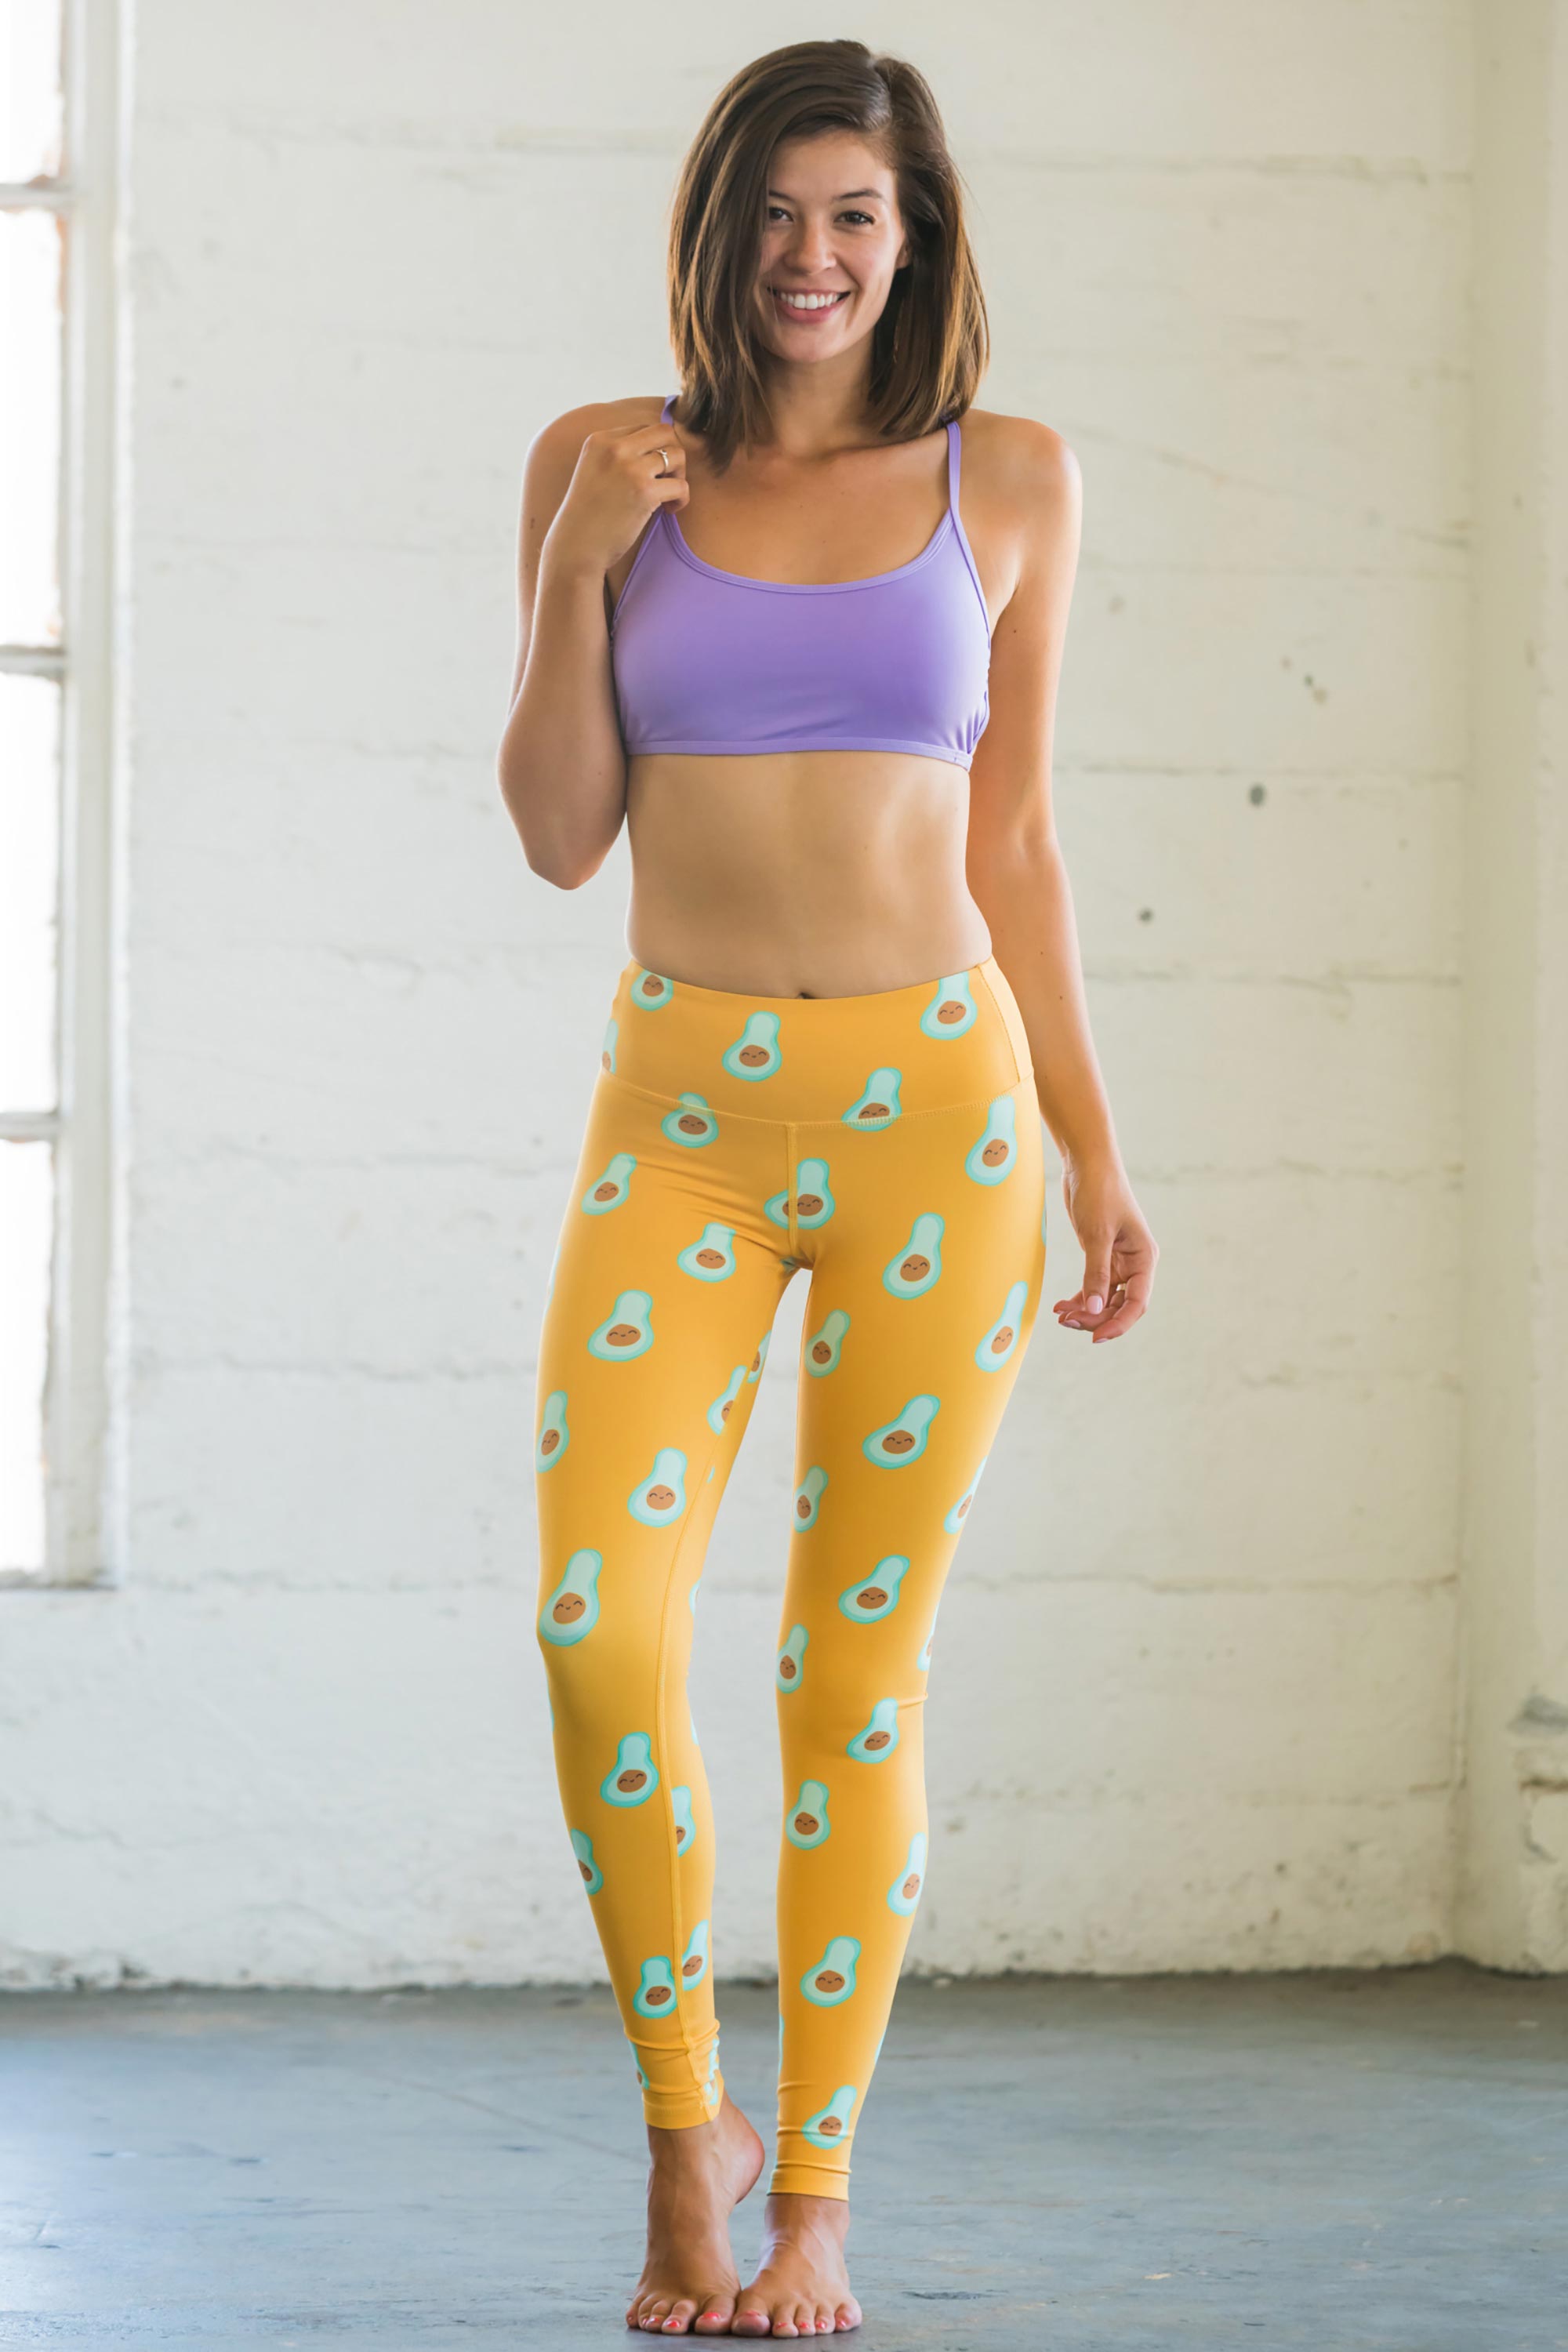 Flexi Lexi Yoga Pants Deliver Performance With a Dose of Cute